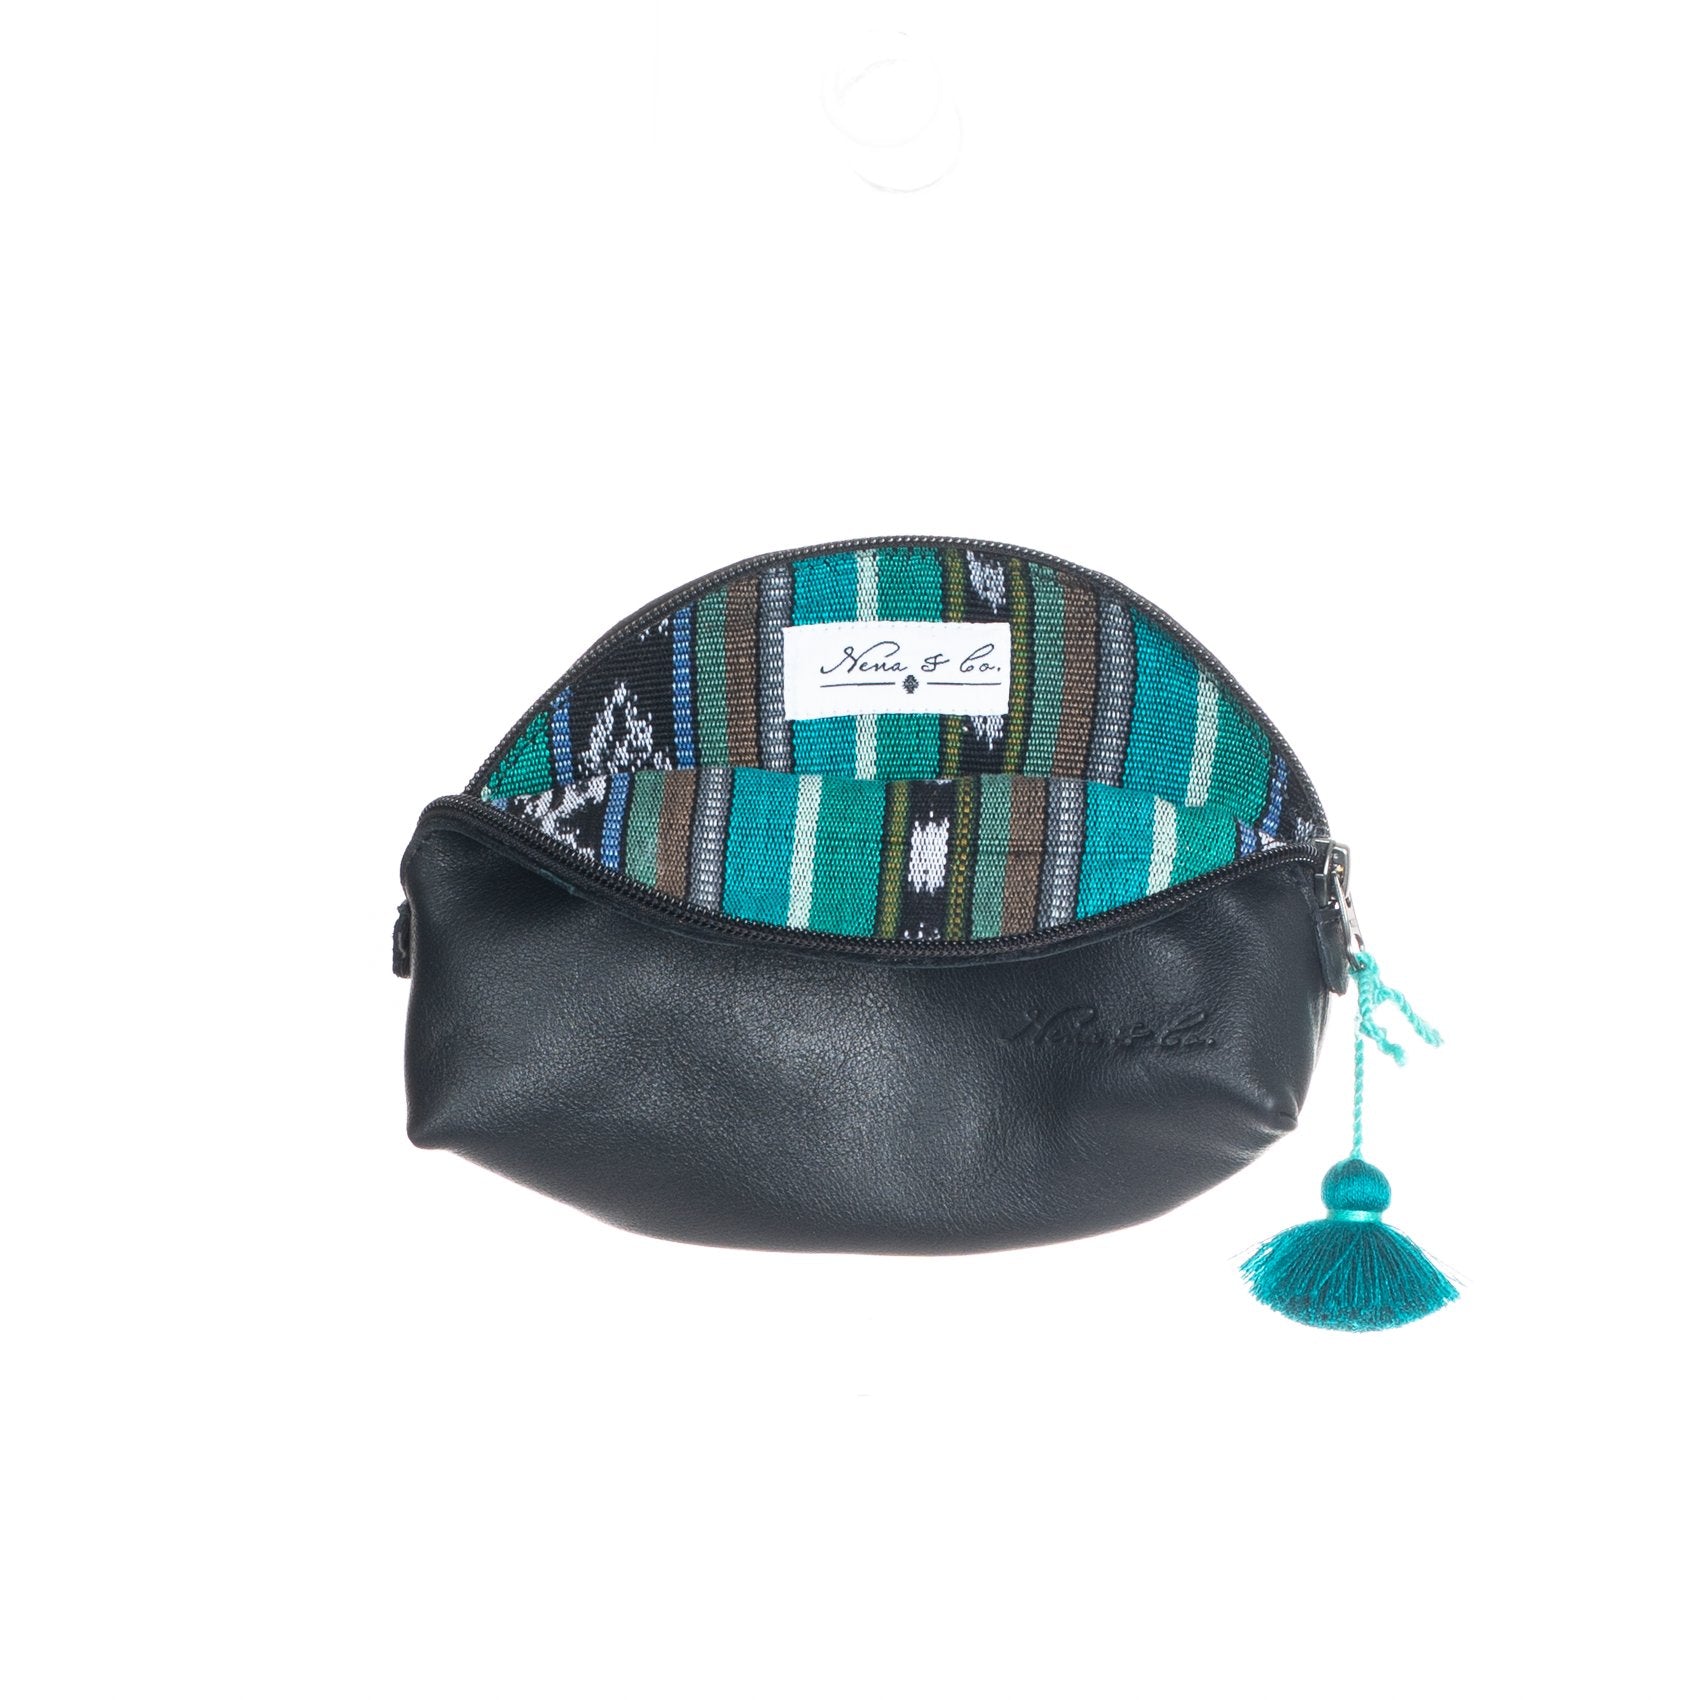 DOME CLUTCH - FULL LEATHER COLLECTION - BLACK - JAVANA NIGHTS LINER